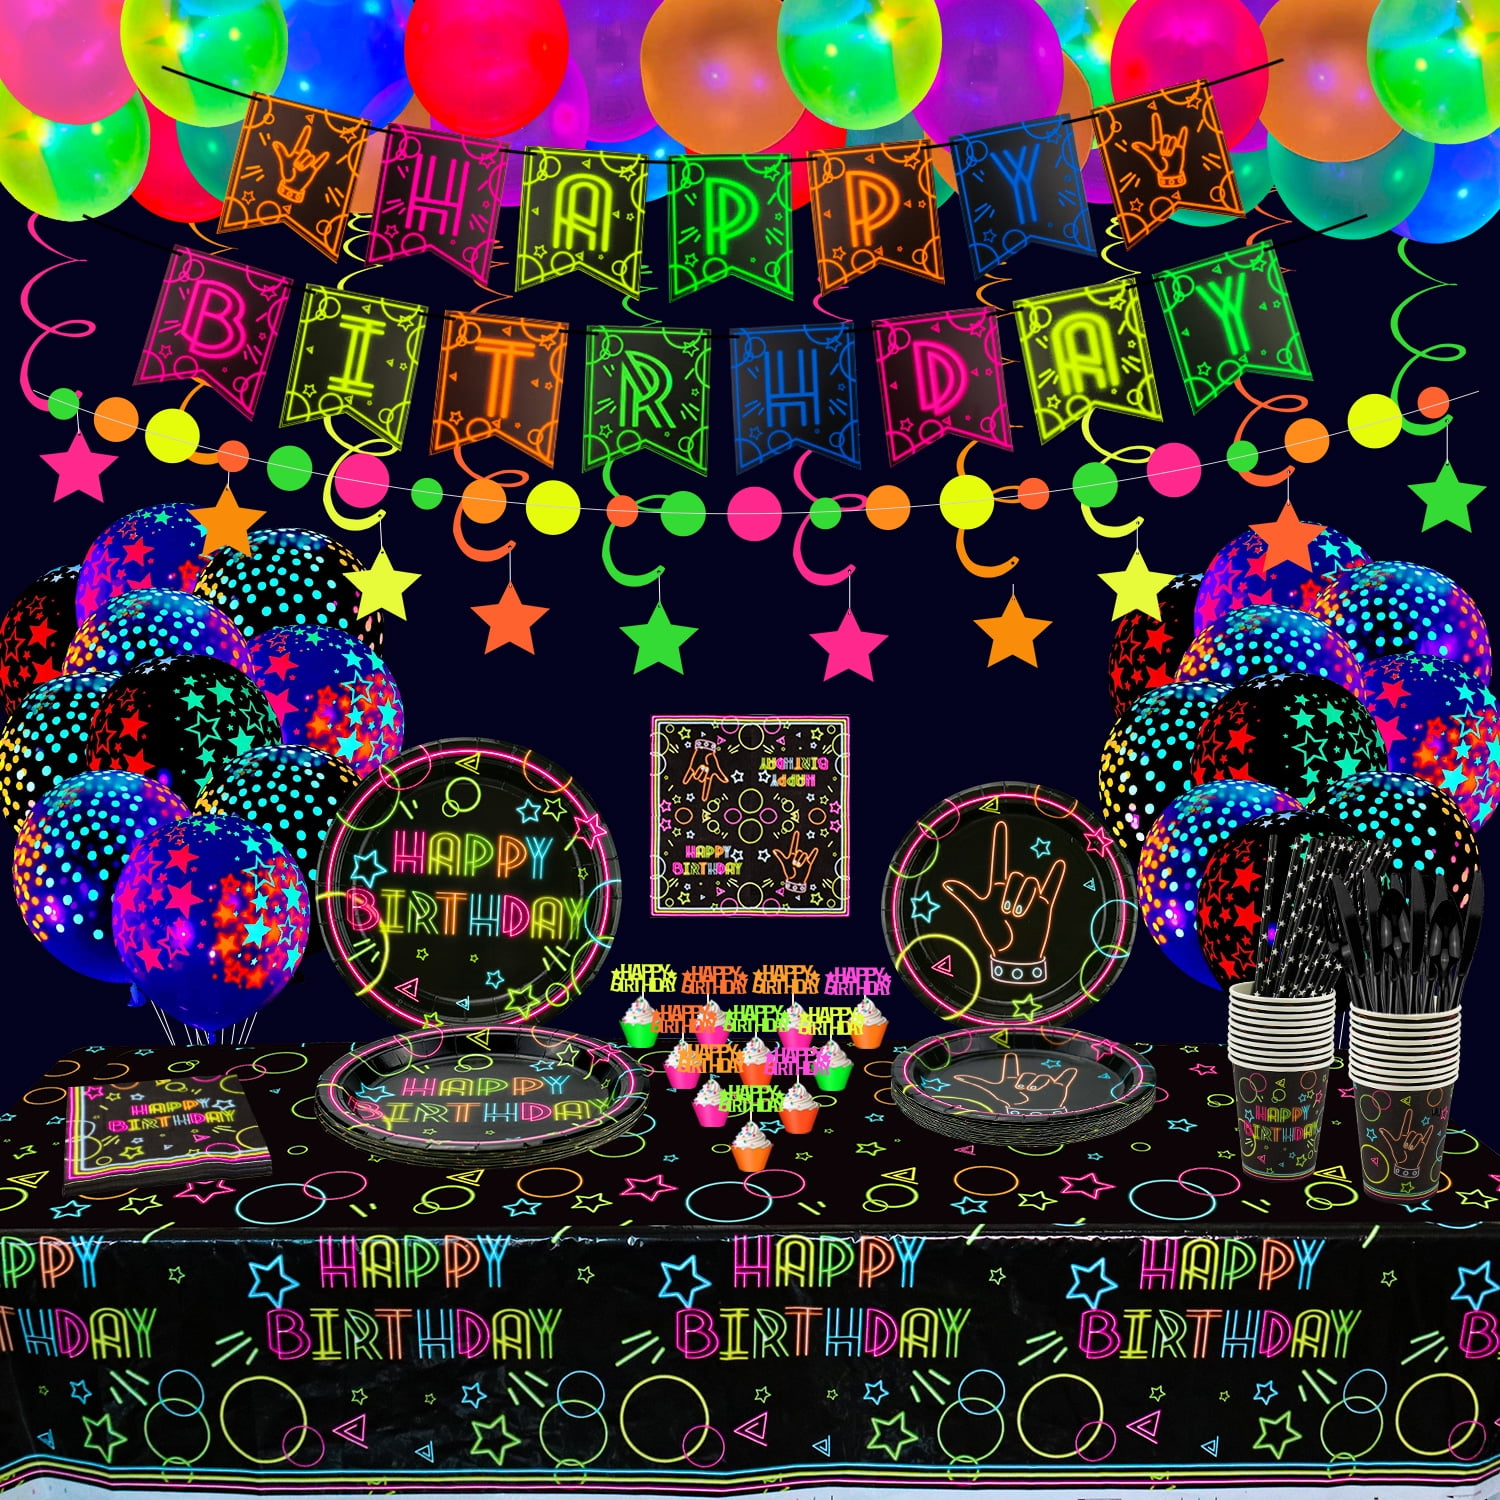 Glow Neon Party Supplies - Neon Balloon, Glow in the Dark Happy Birthday Banner, Hanging Swirls, Cake Topper, Tablecloth, Plates, Napkins, Cup for Blacklight Party Decorations, Serves 20 Guest - Walmart.com